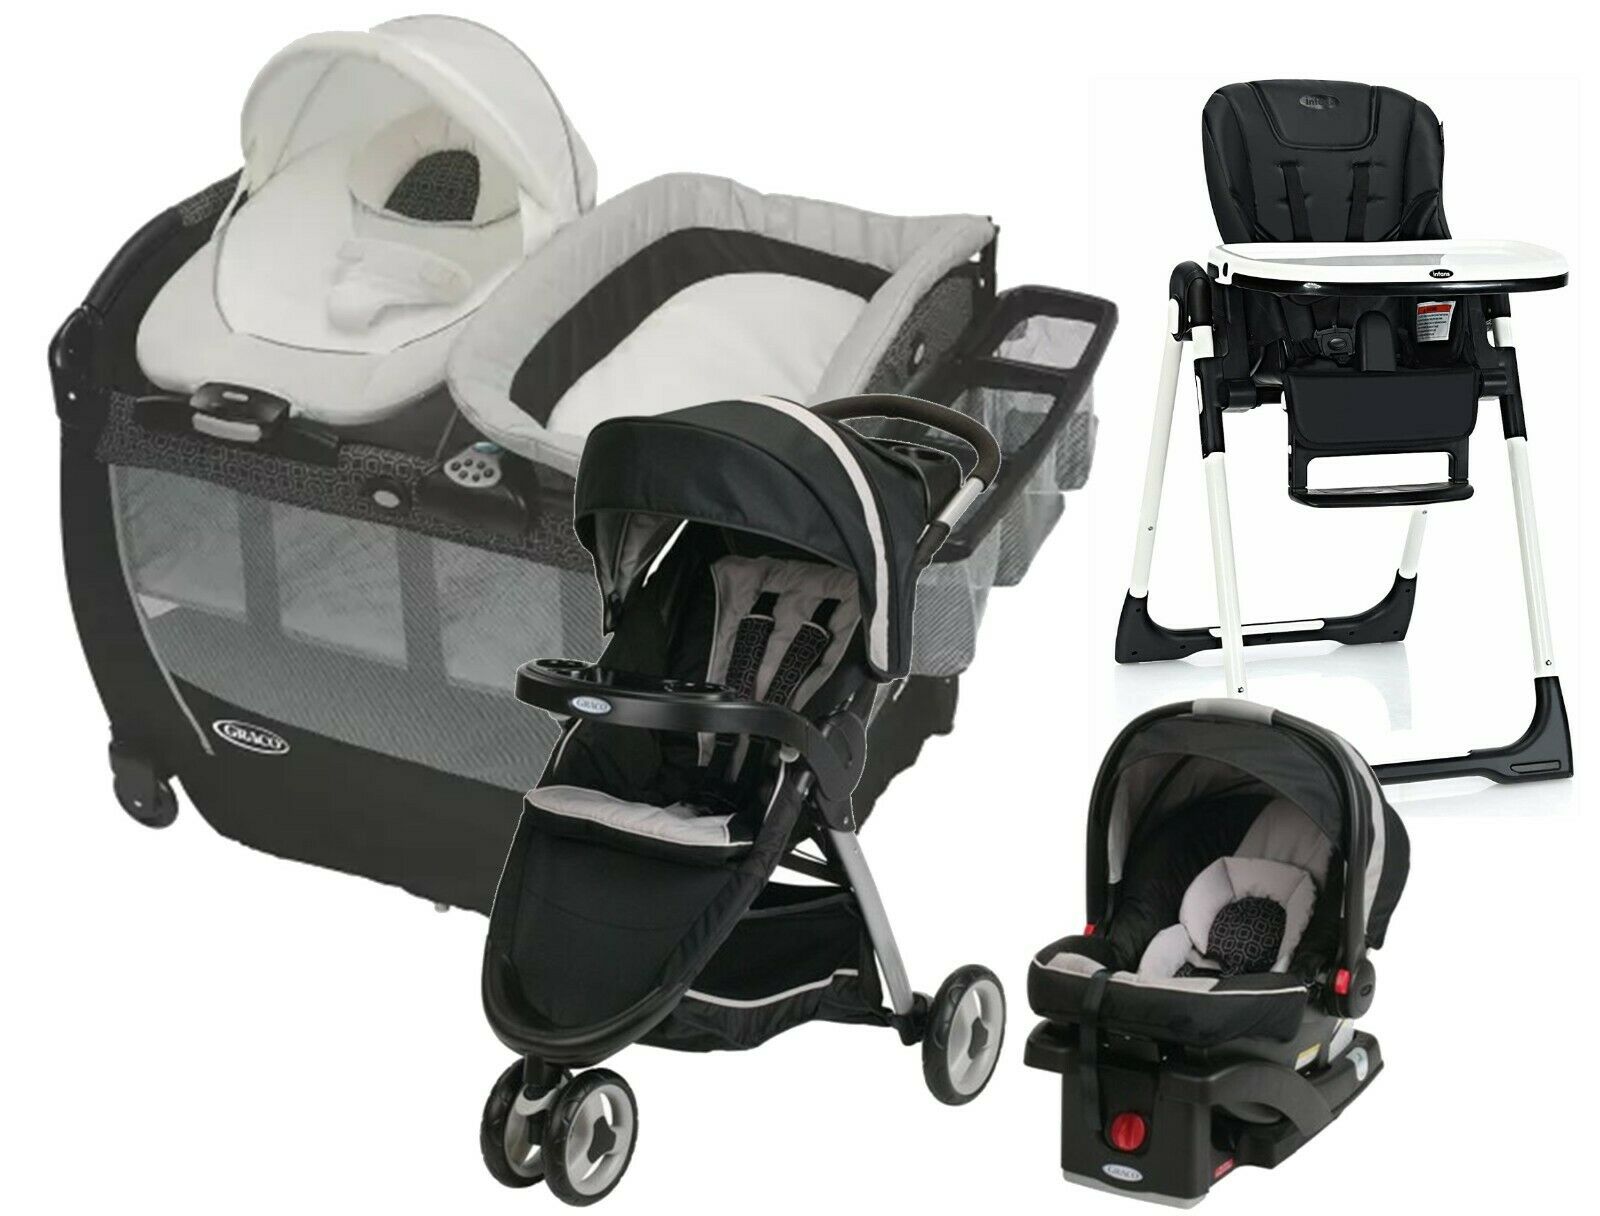 Baby Girl Combo Travel System Set Stroller with Car Seat Playard